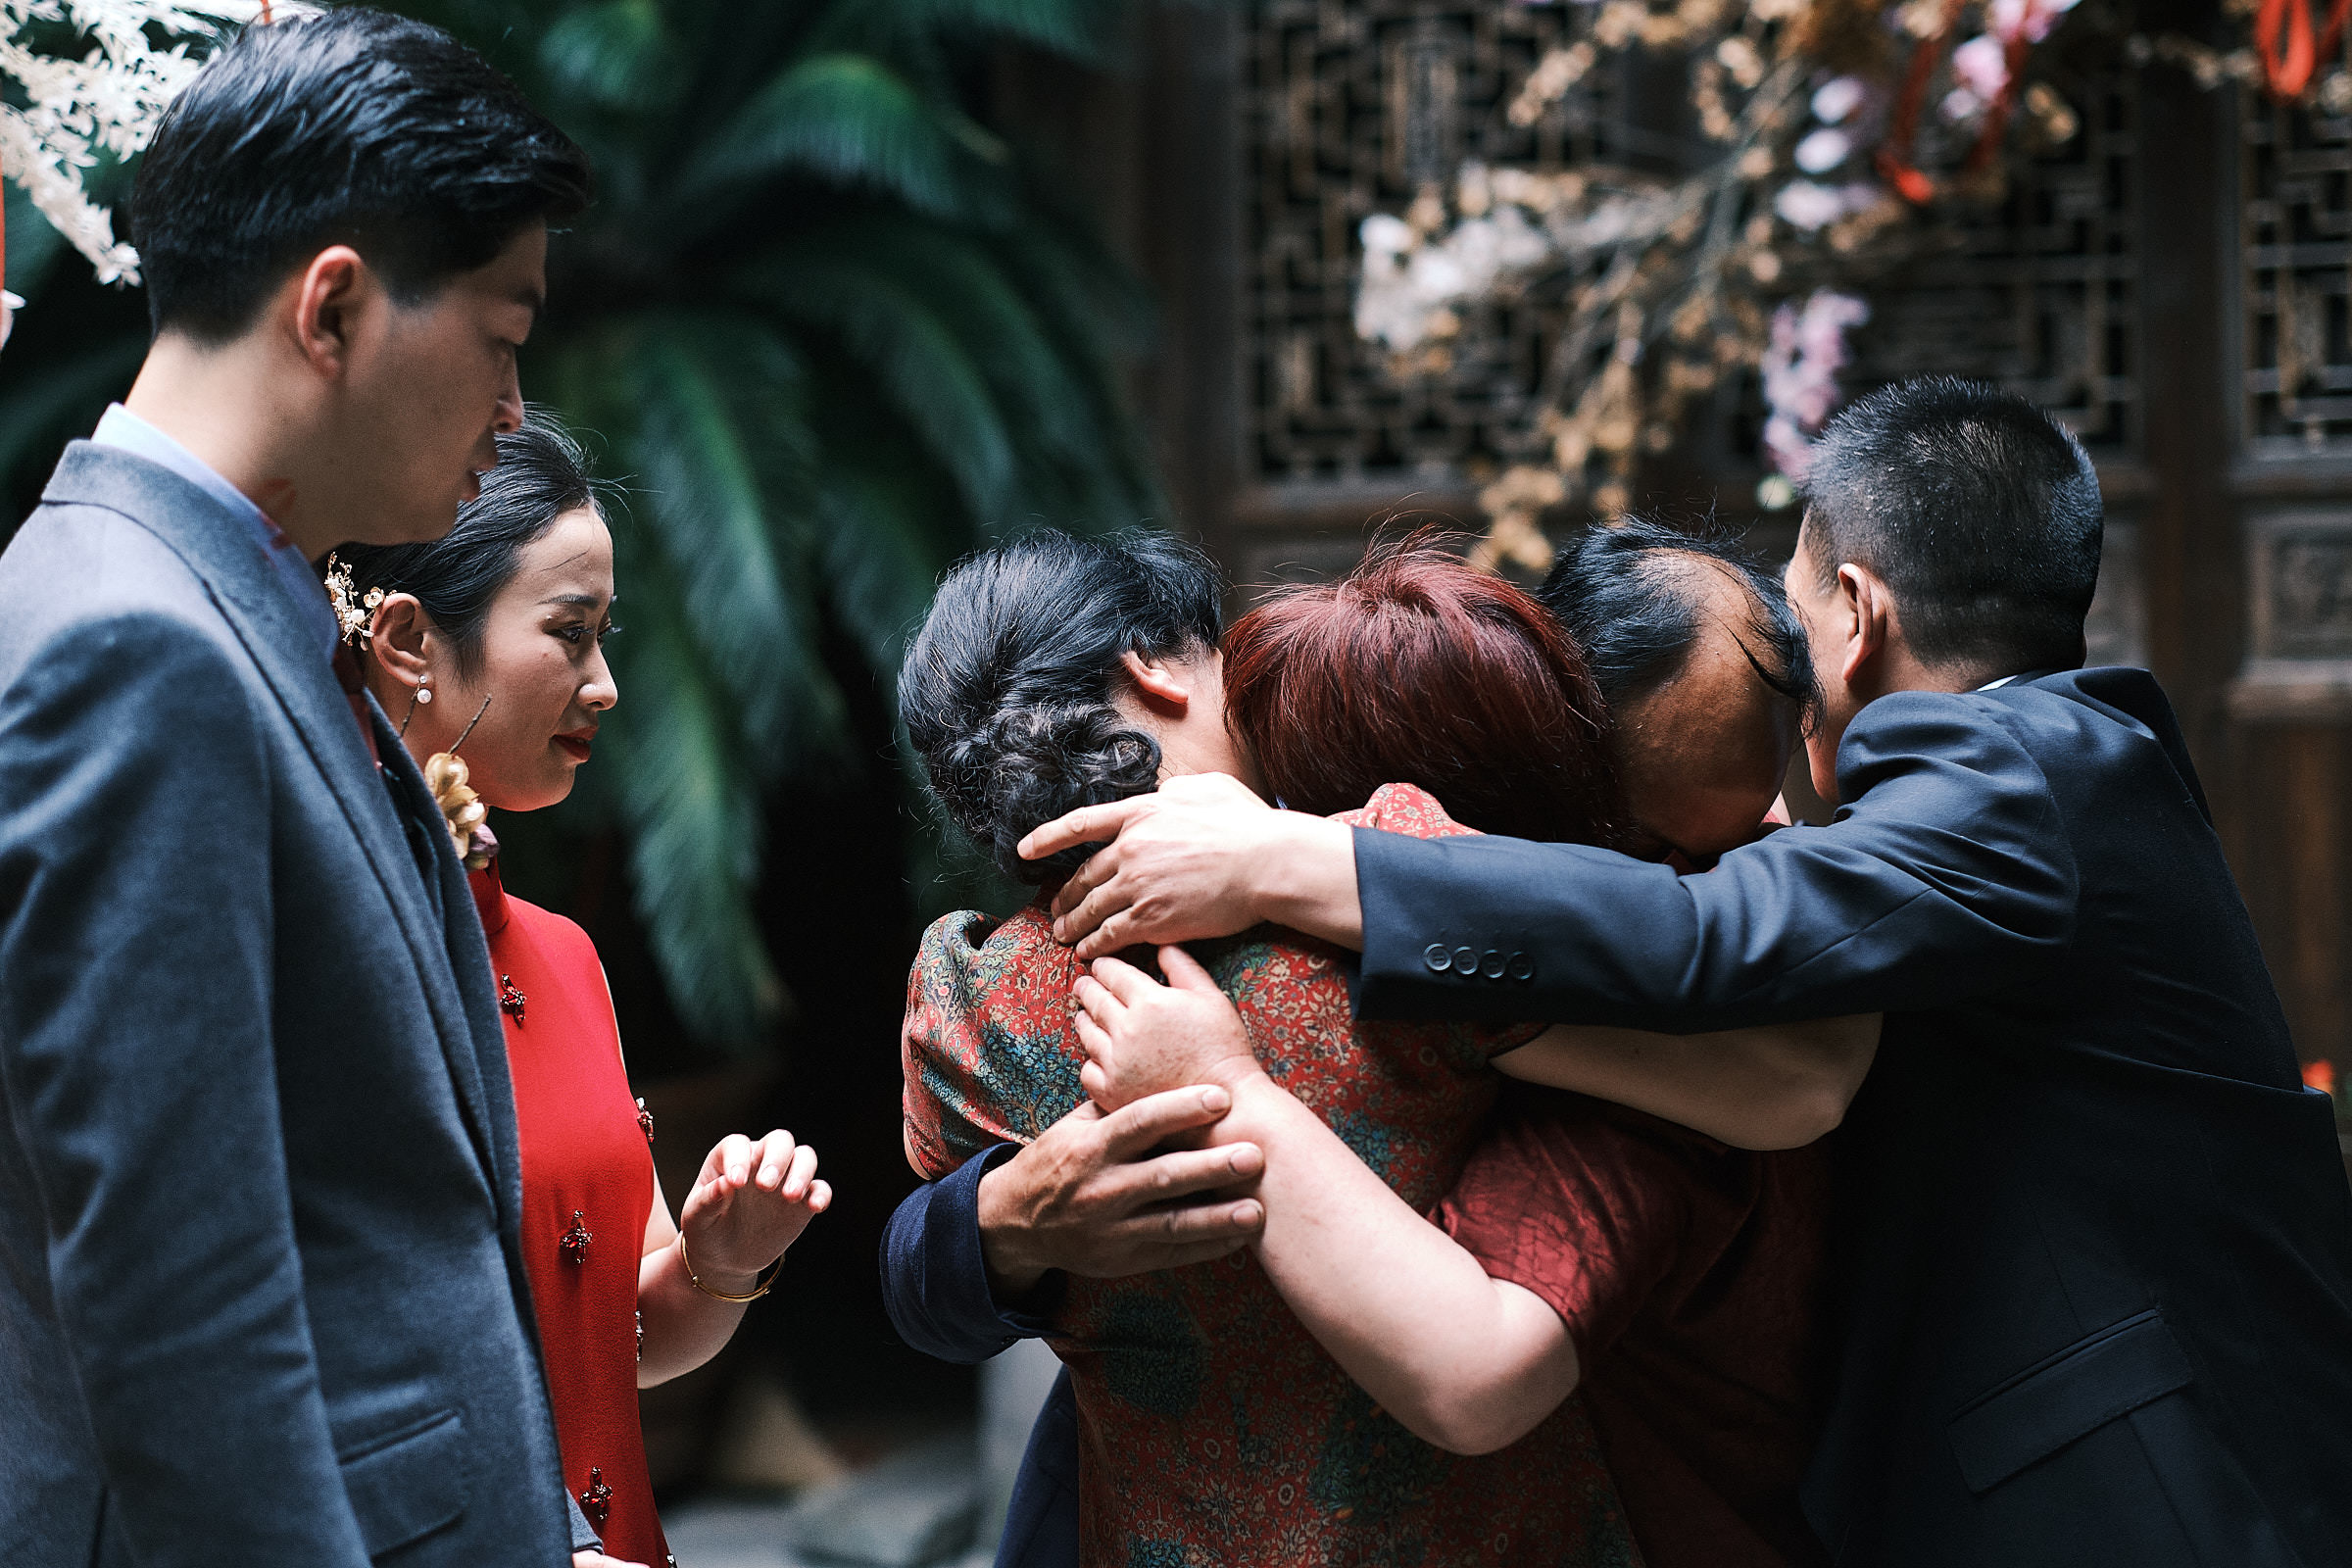 Bride And Groom Family Share An Emotive Embrace At The End Of Wedding Ceremony In Hangzhou China